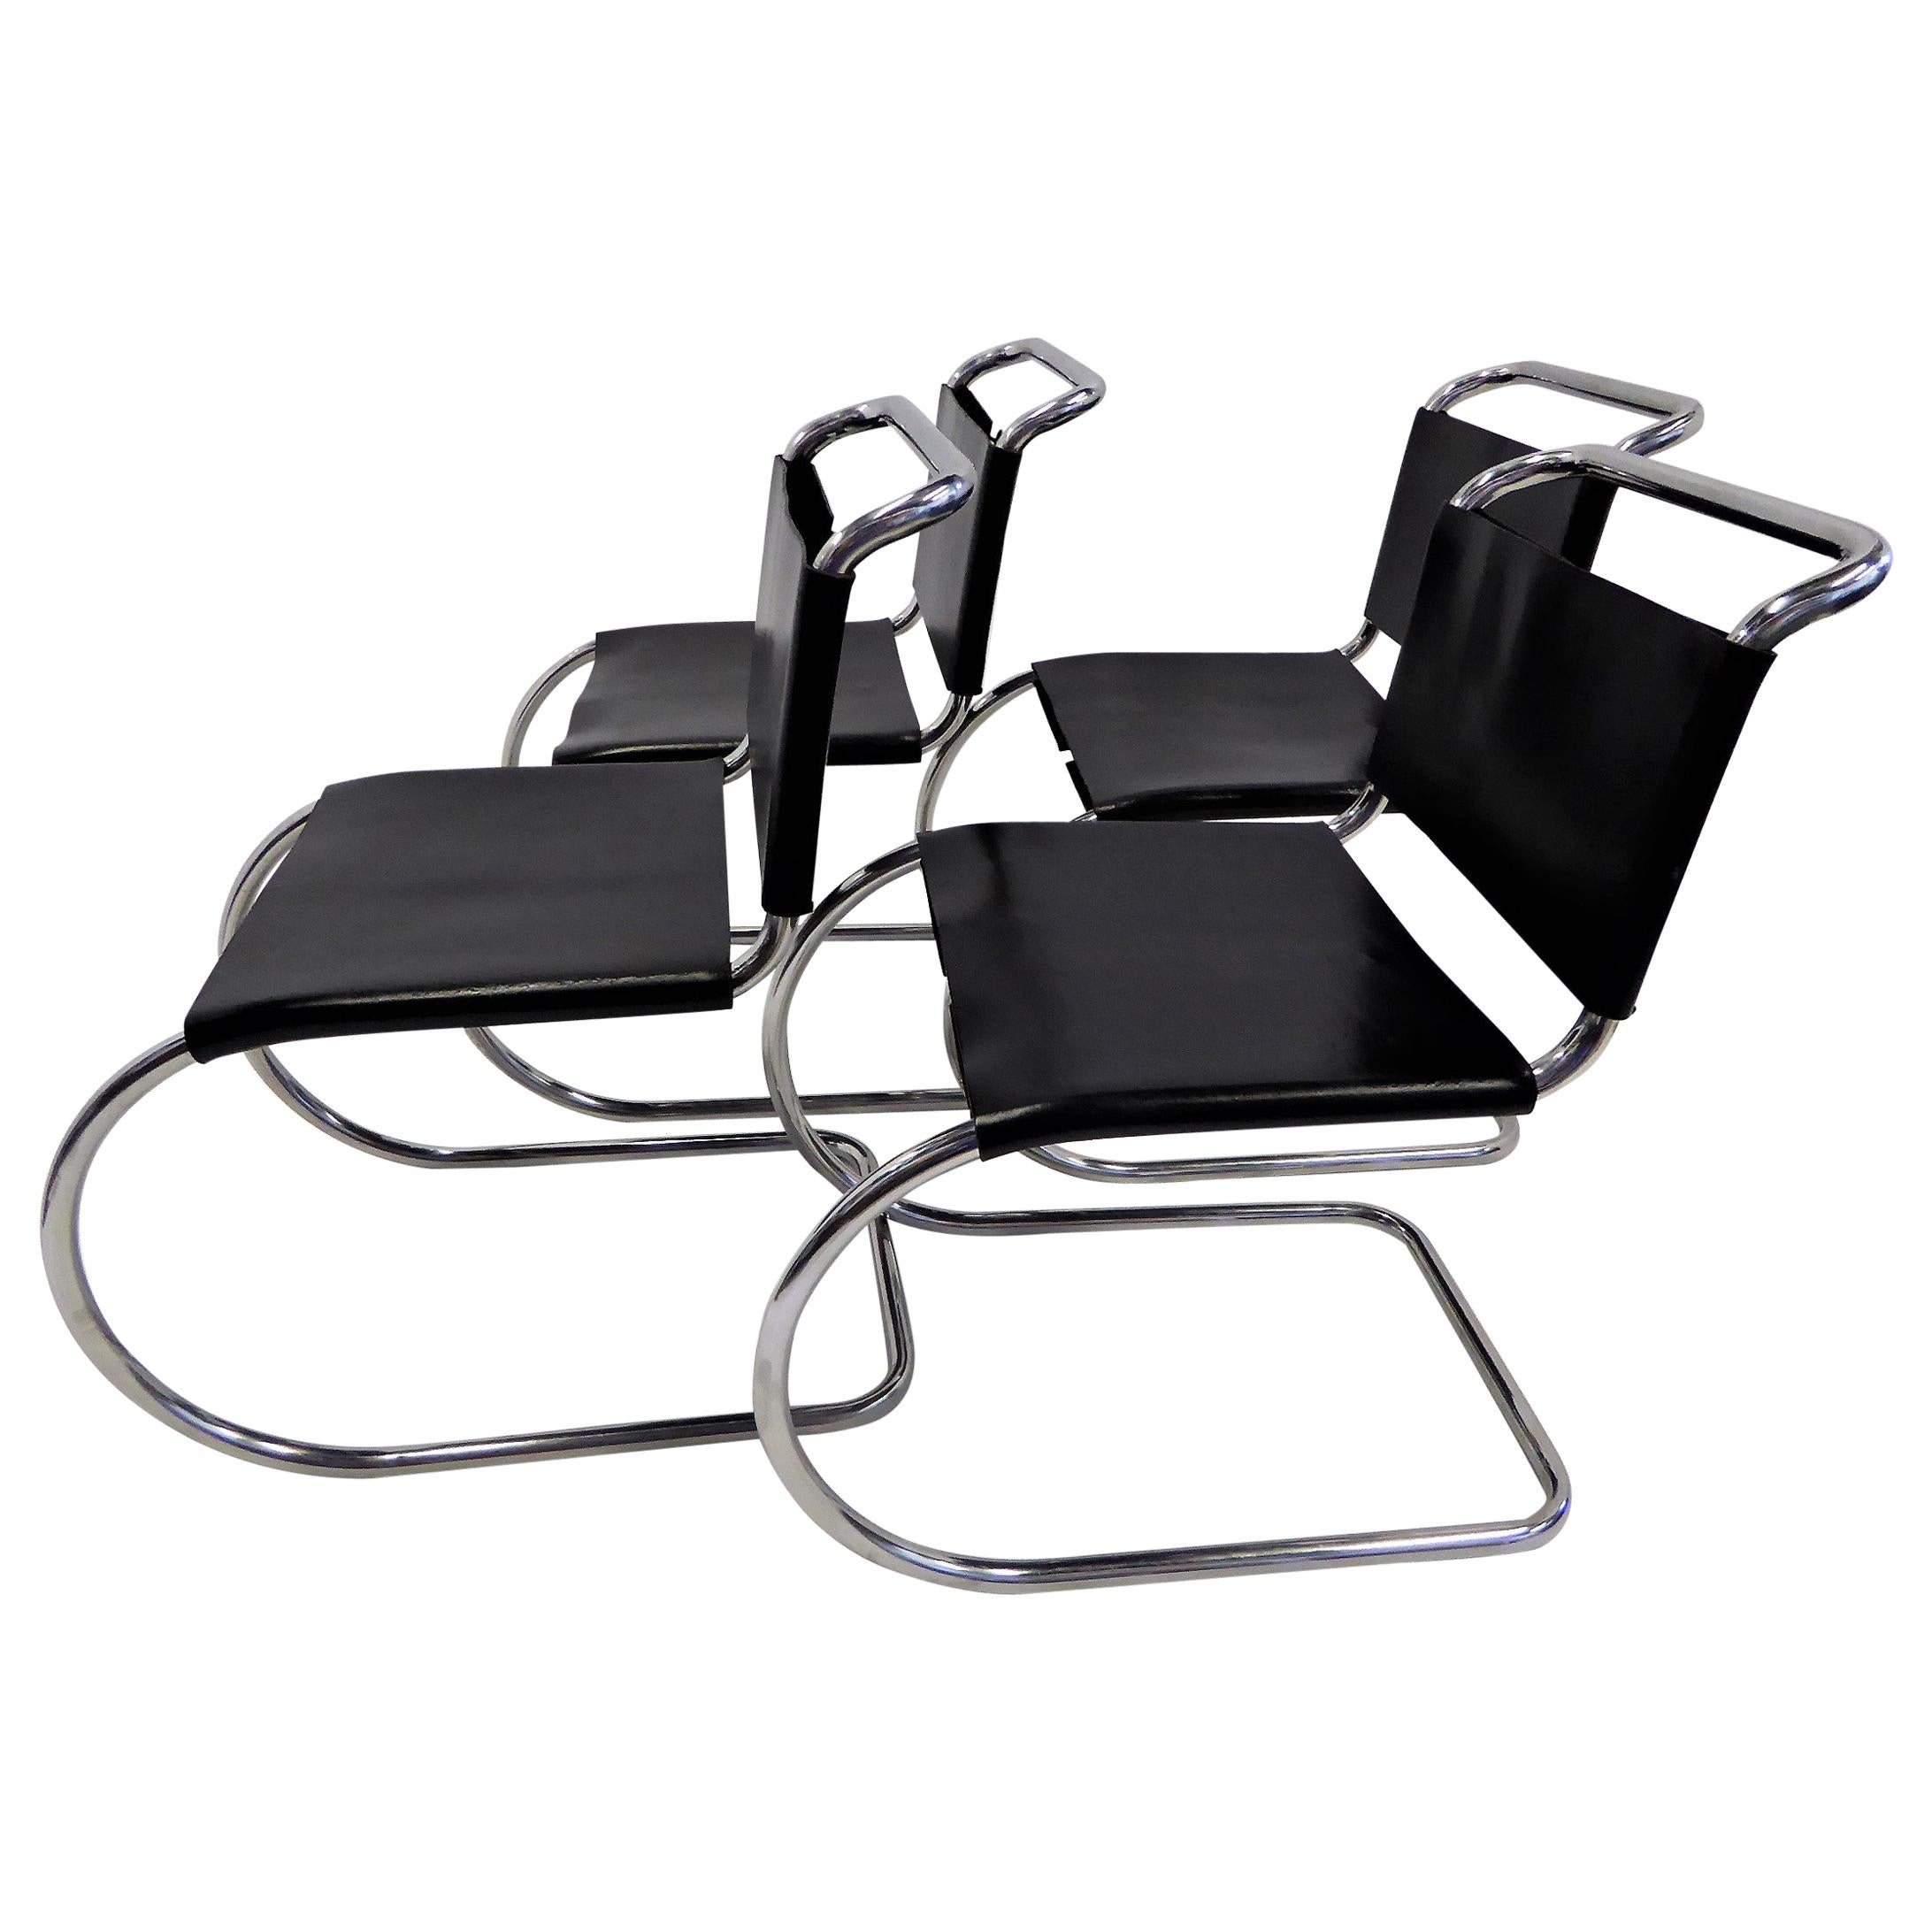 Bauhaus Set of 4 Modern Black Leather Knoll MR10 Dining Chairs Mies van der Rohe